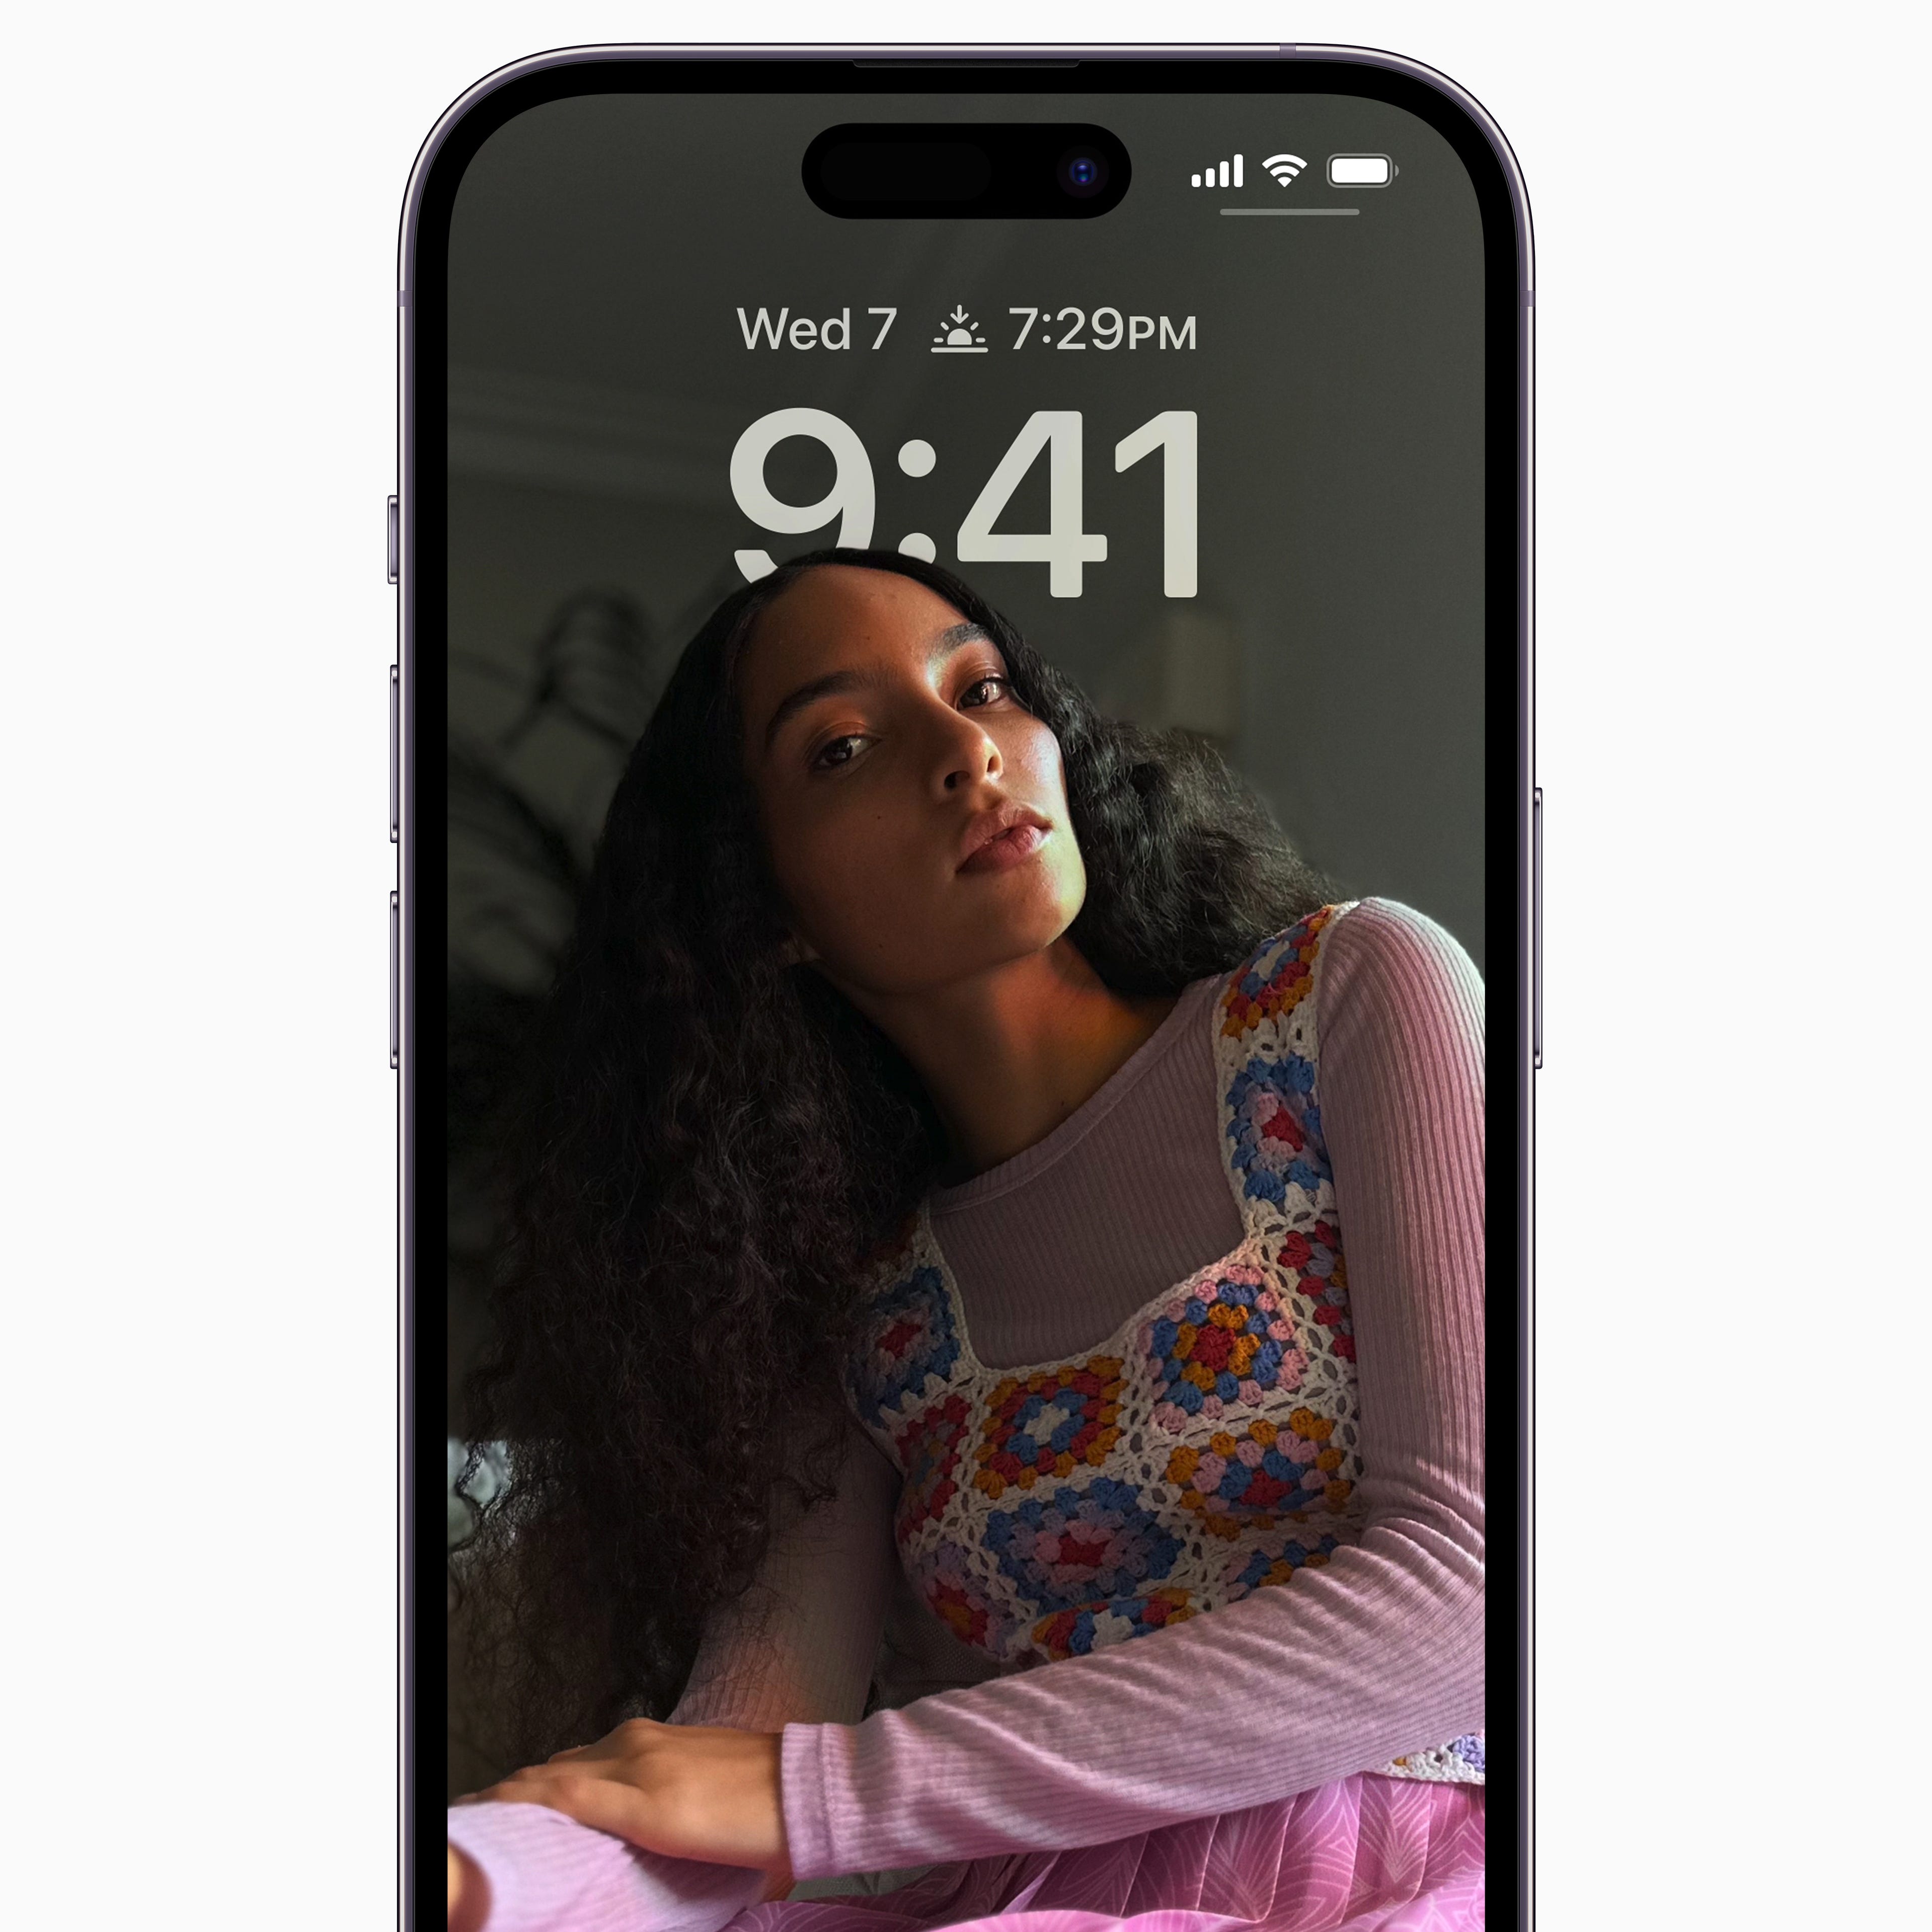 The reimagined Lock Screen in iOS 16 offers several new features, which compliments Apple's decision to introduce an Always-on display on iPhone 14 Pro. Now users can glance at photos and widgets that offer helpful info while on the go.